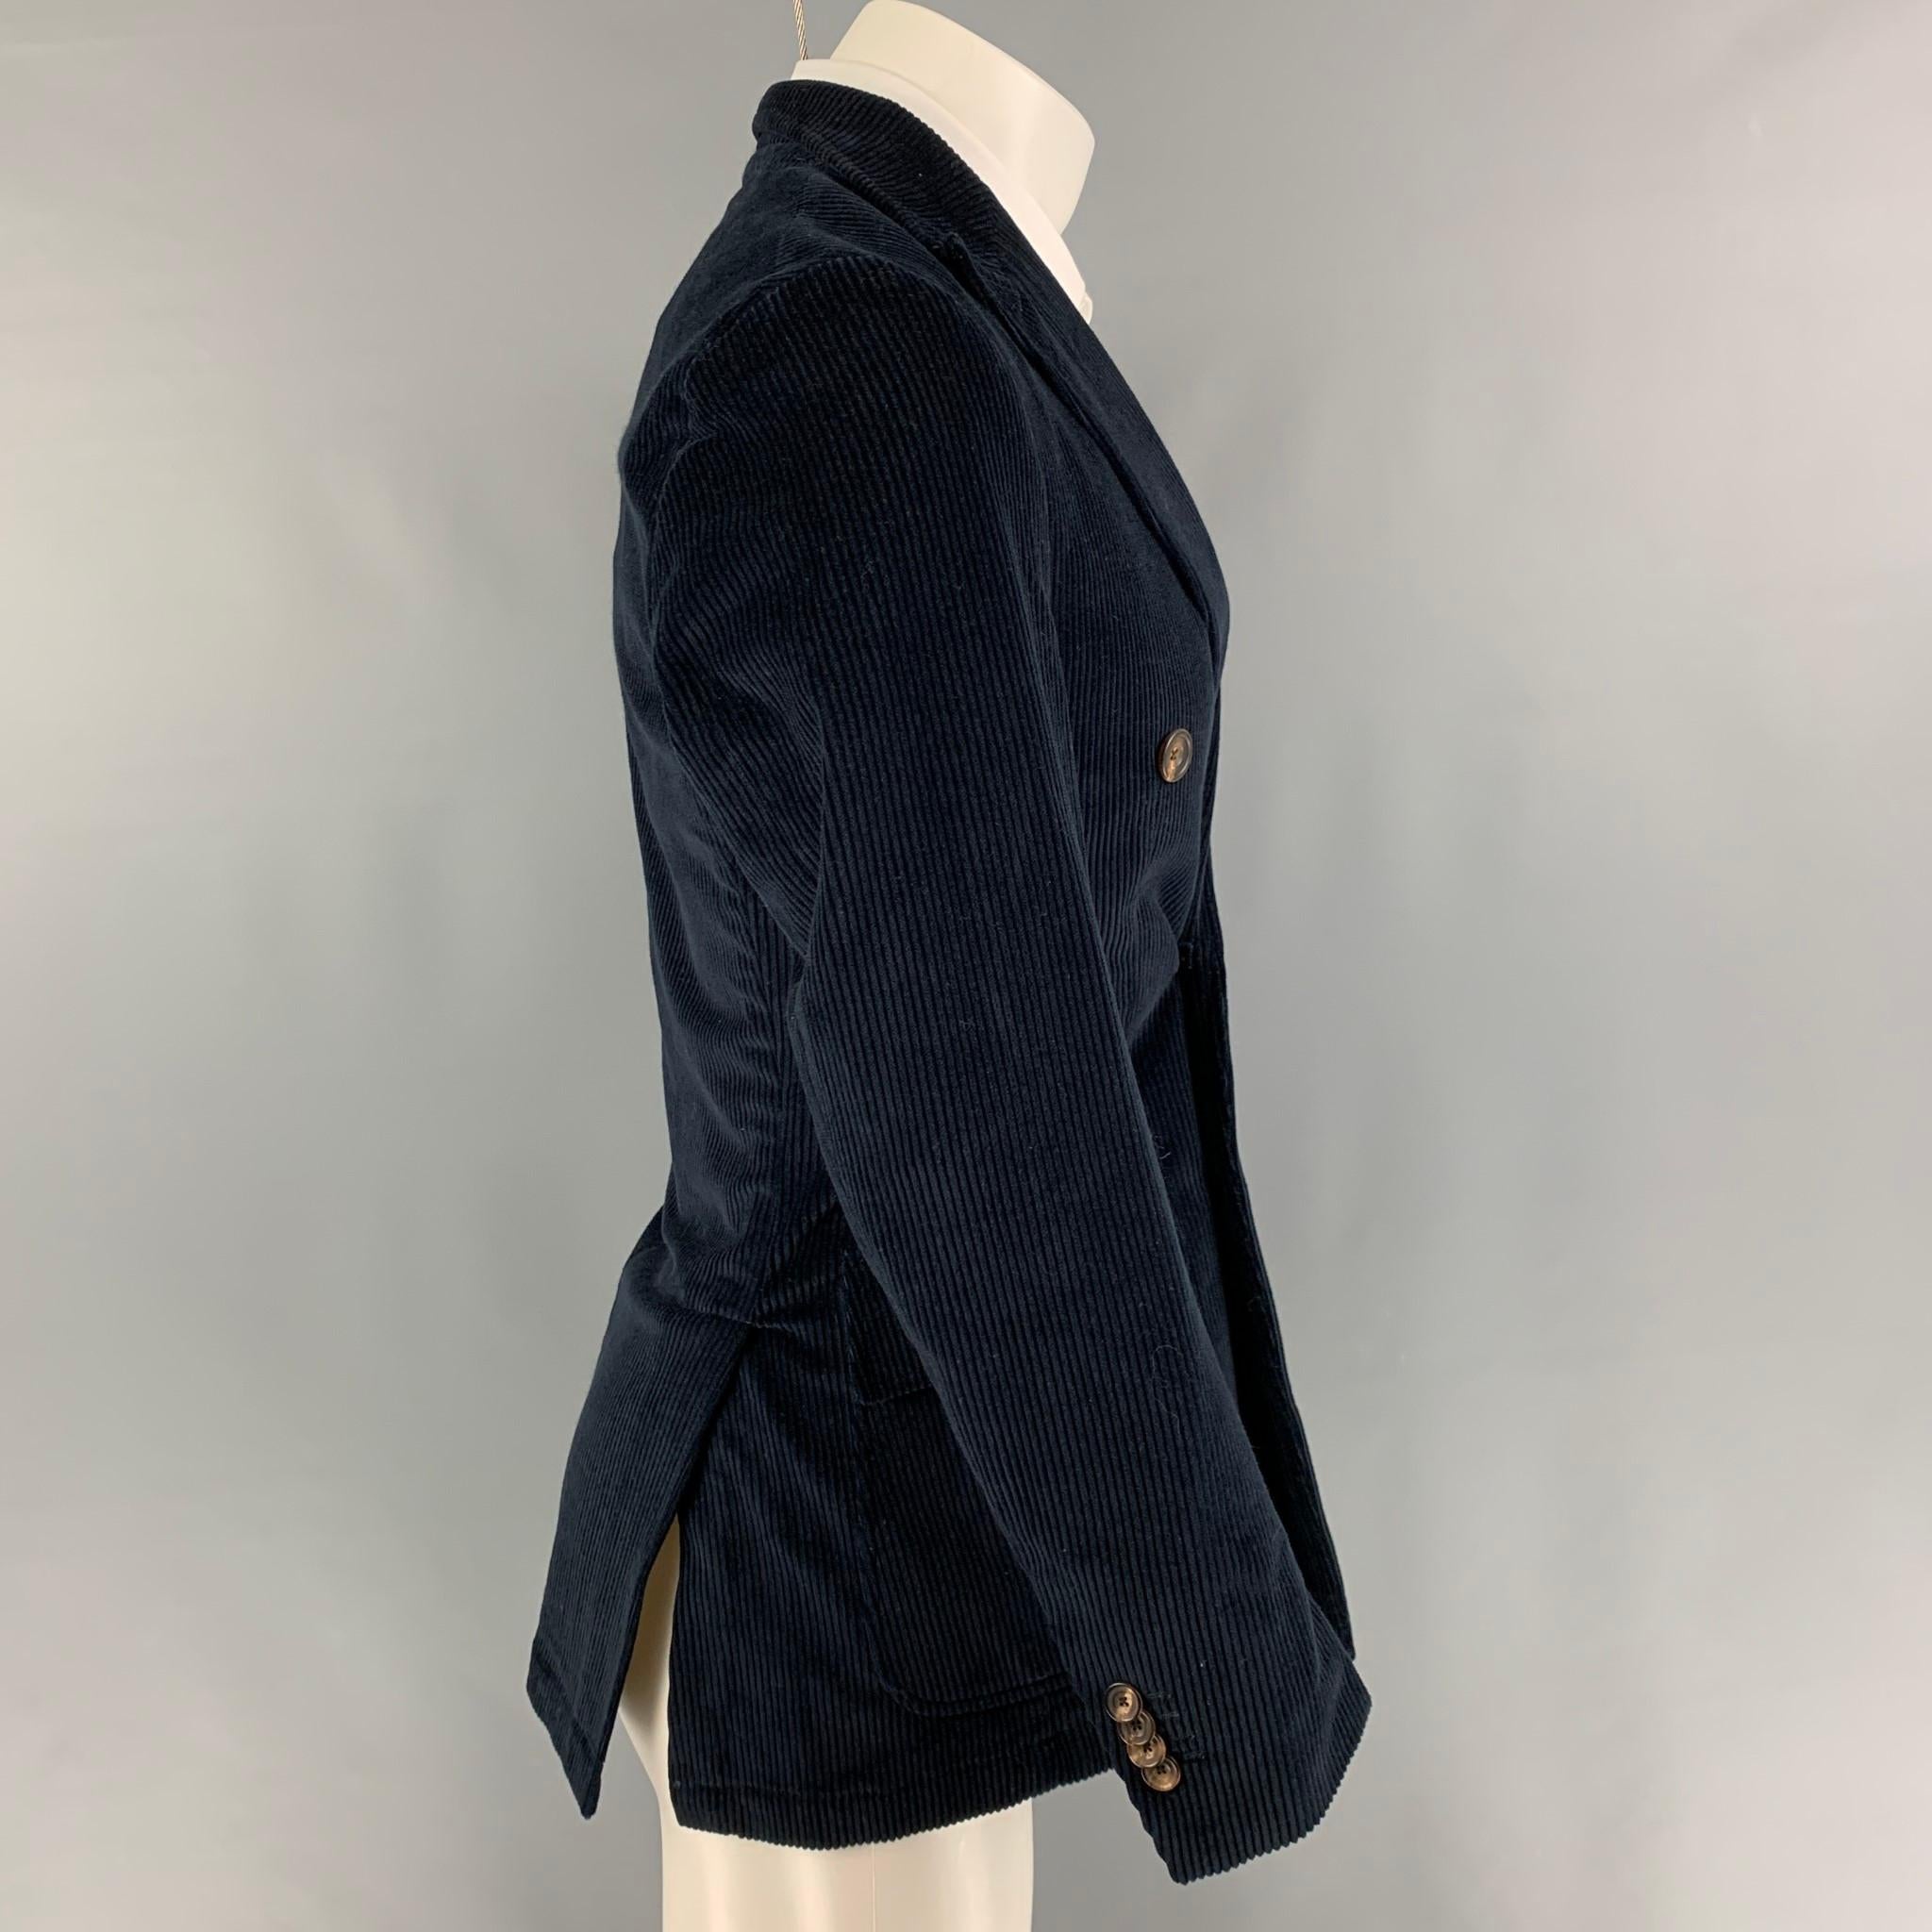 DOPPIAA sport coat comes in a navy corduroy cotton featuring a peak lapel, flap pockets, double back vent, and a double breasted closure. Made in Italy. 

Very Good Pre-Owned Condition.
Marked: 46

Measurements:

Shoulder: 16 in.
Chest: 36